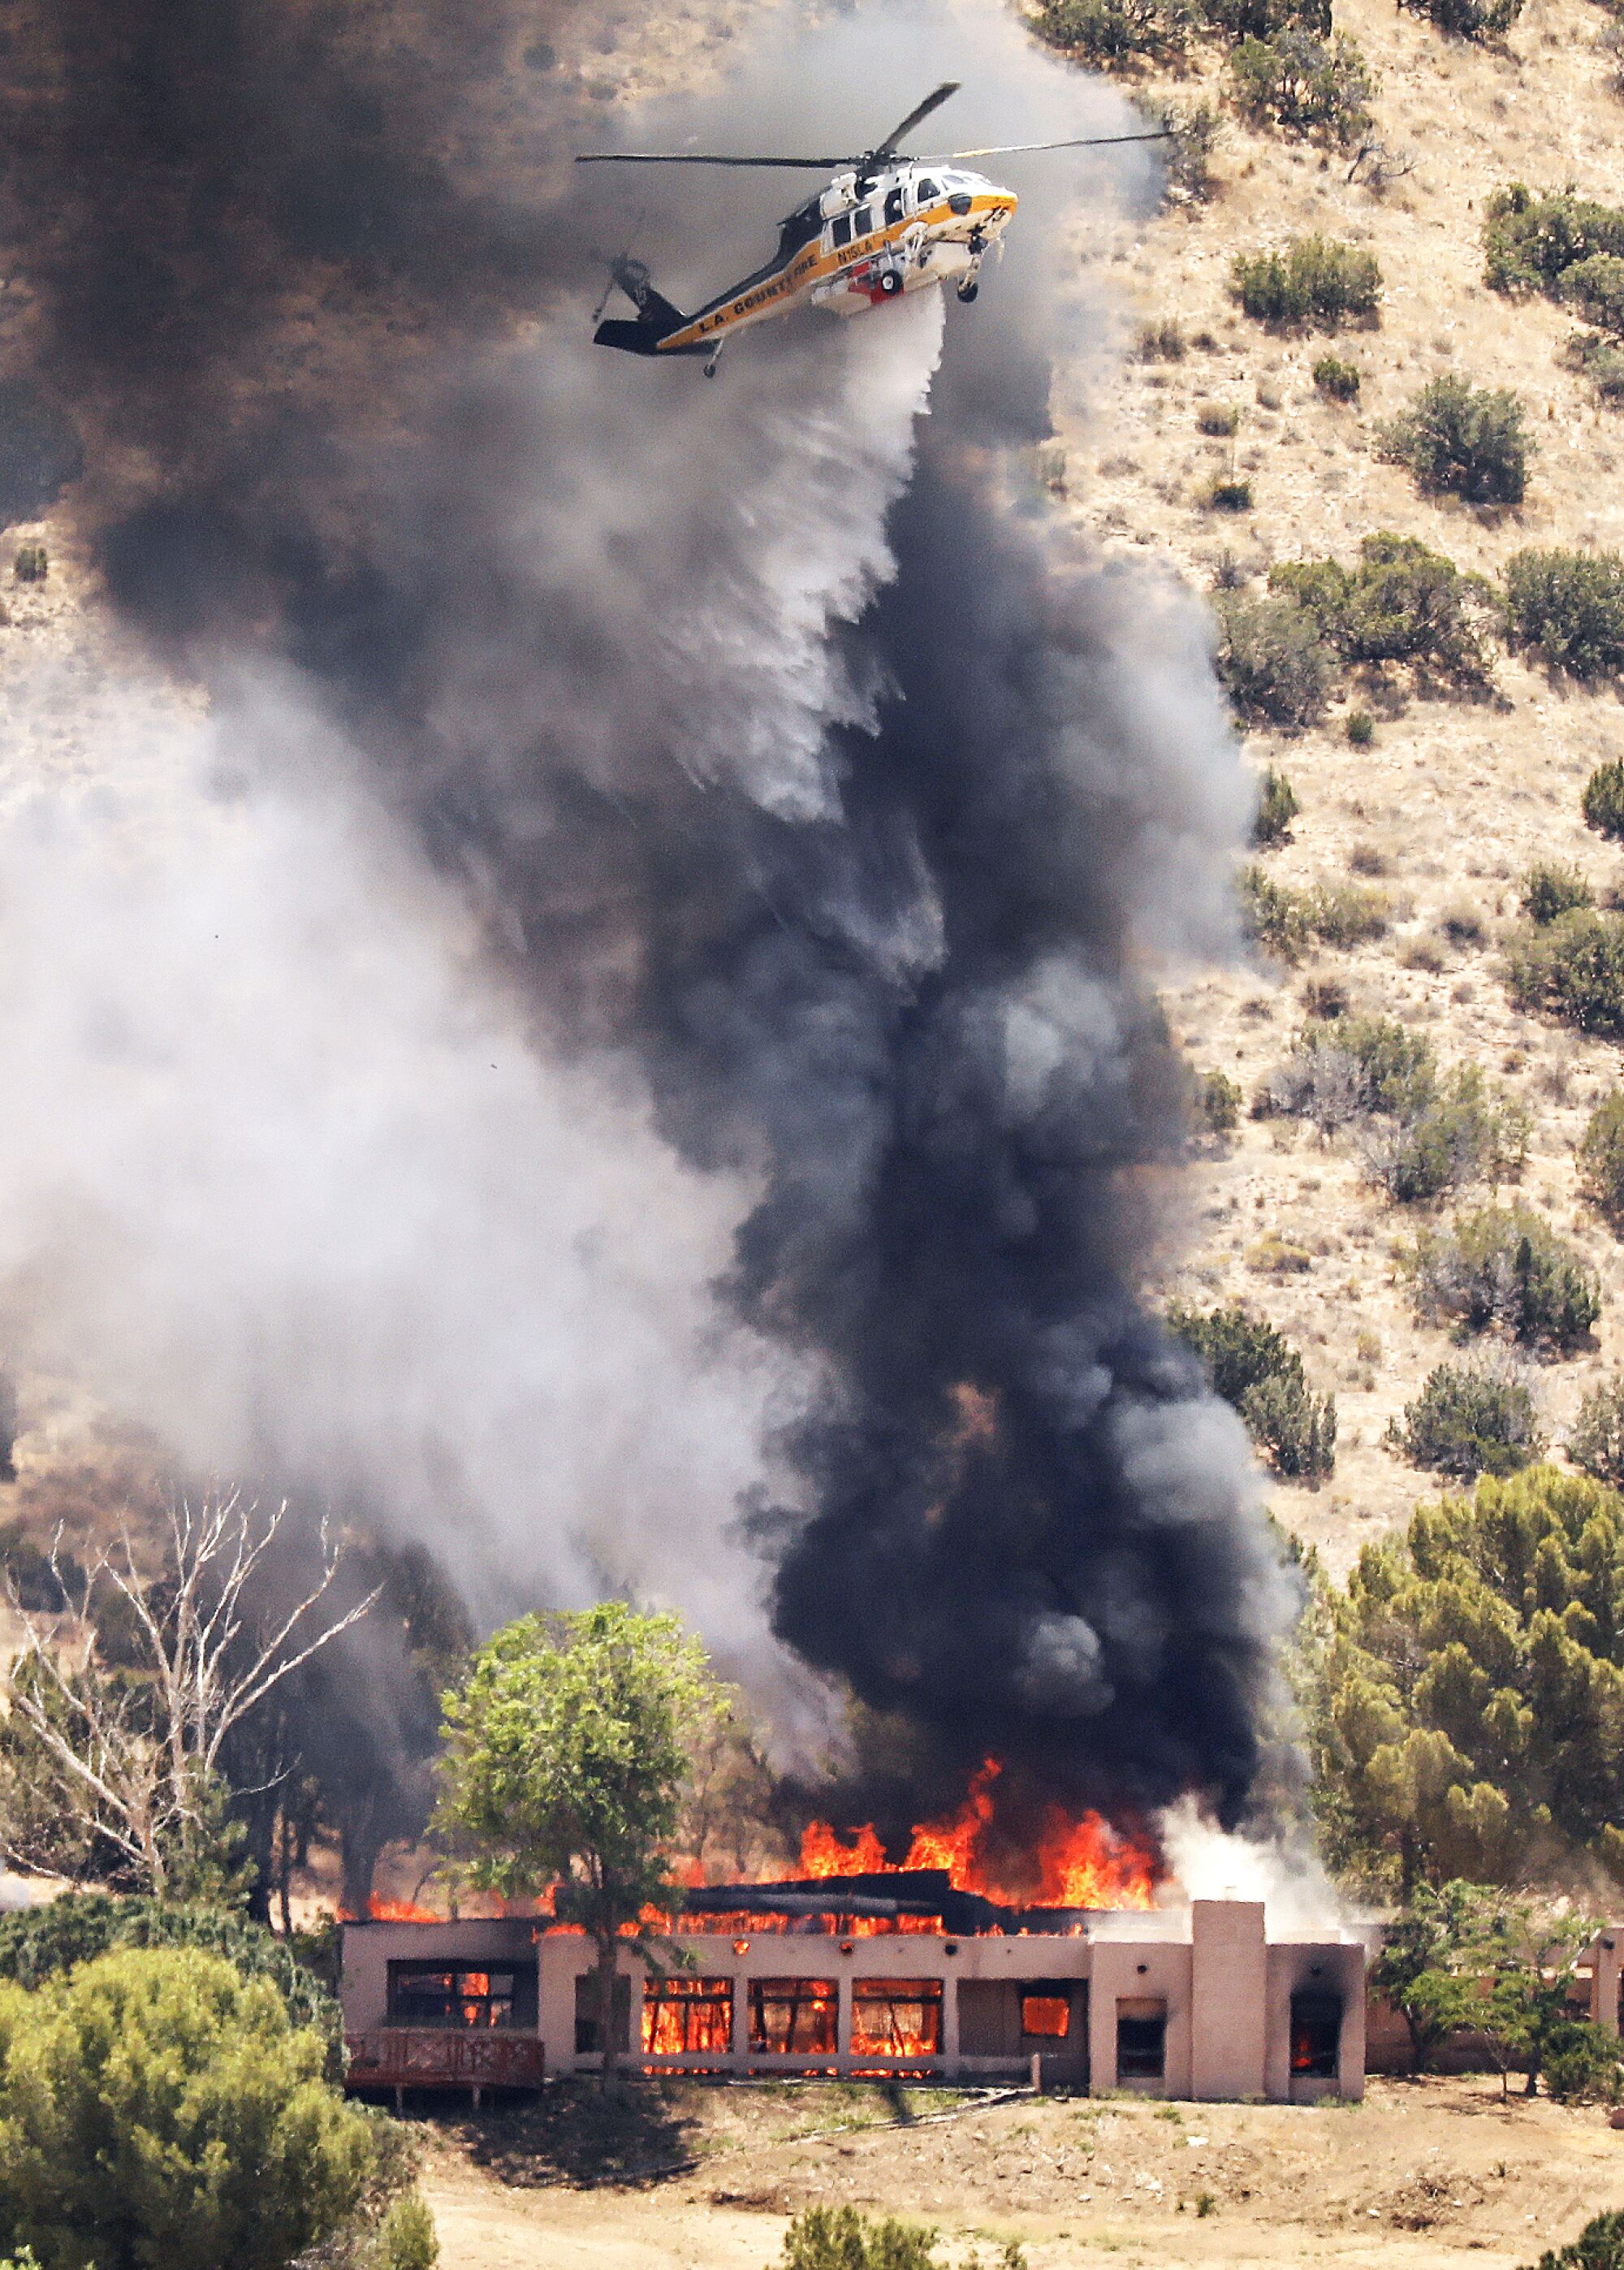 A  helicopter hovers amid a black plume of smoke as a house below is fully engulfed in flames.